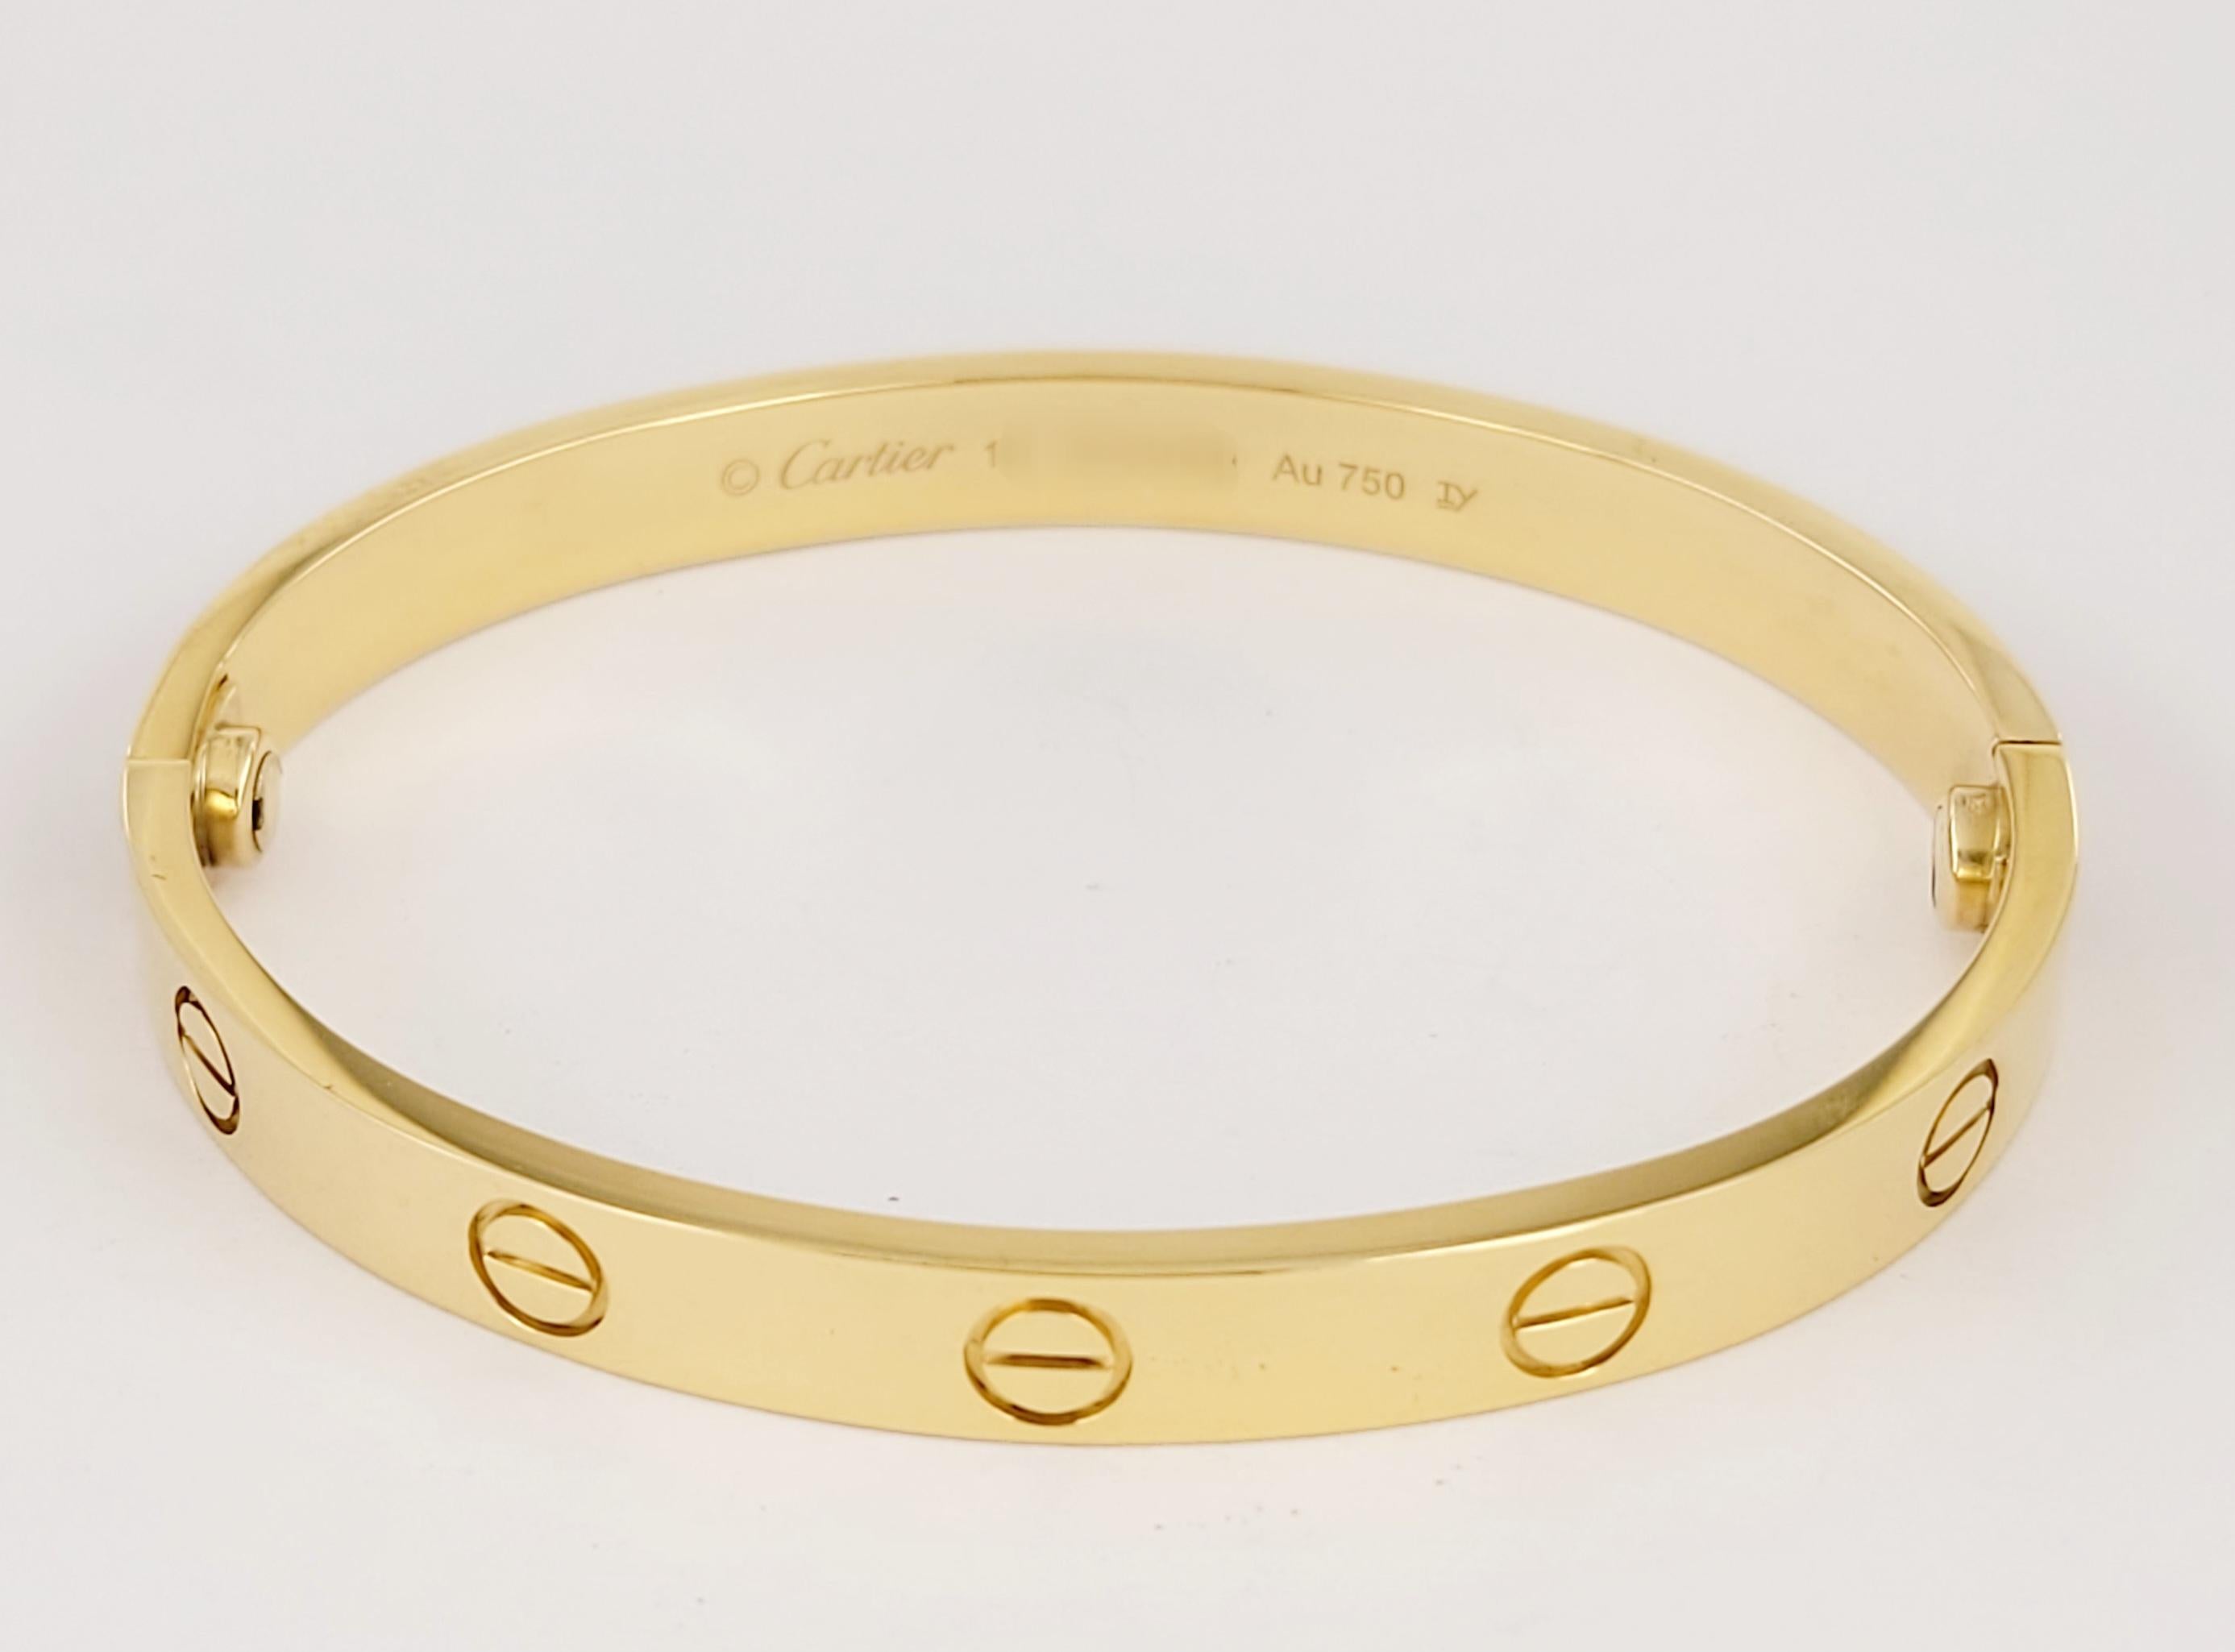 Cartier Love bracelet in 18K Yellow Gold Size 16 In Excellent Condition For Sale In New York, NY